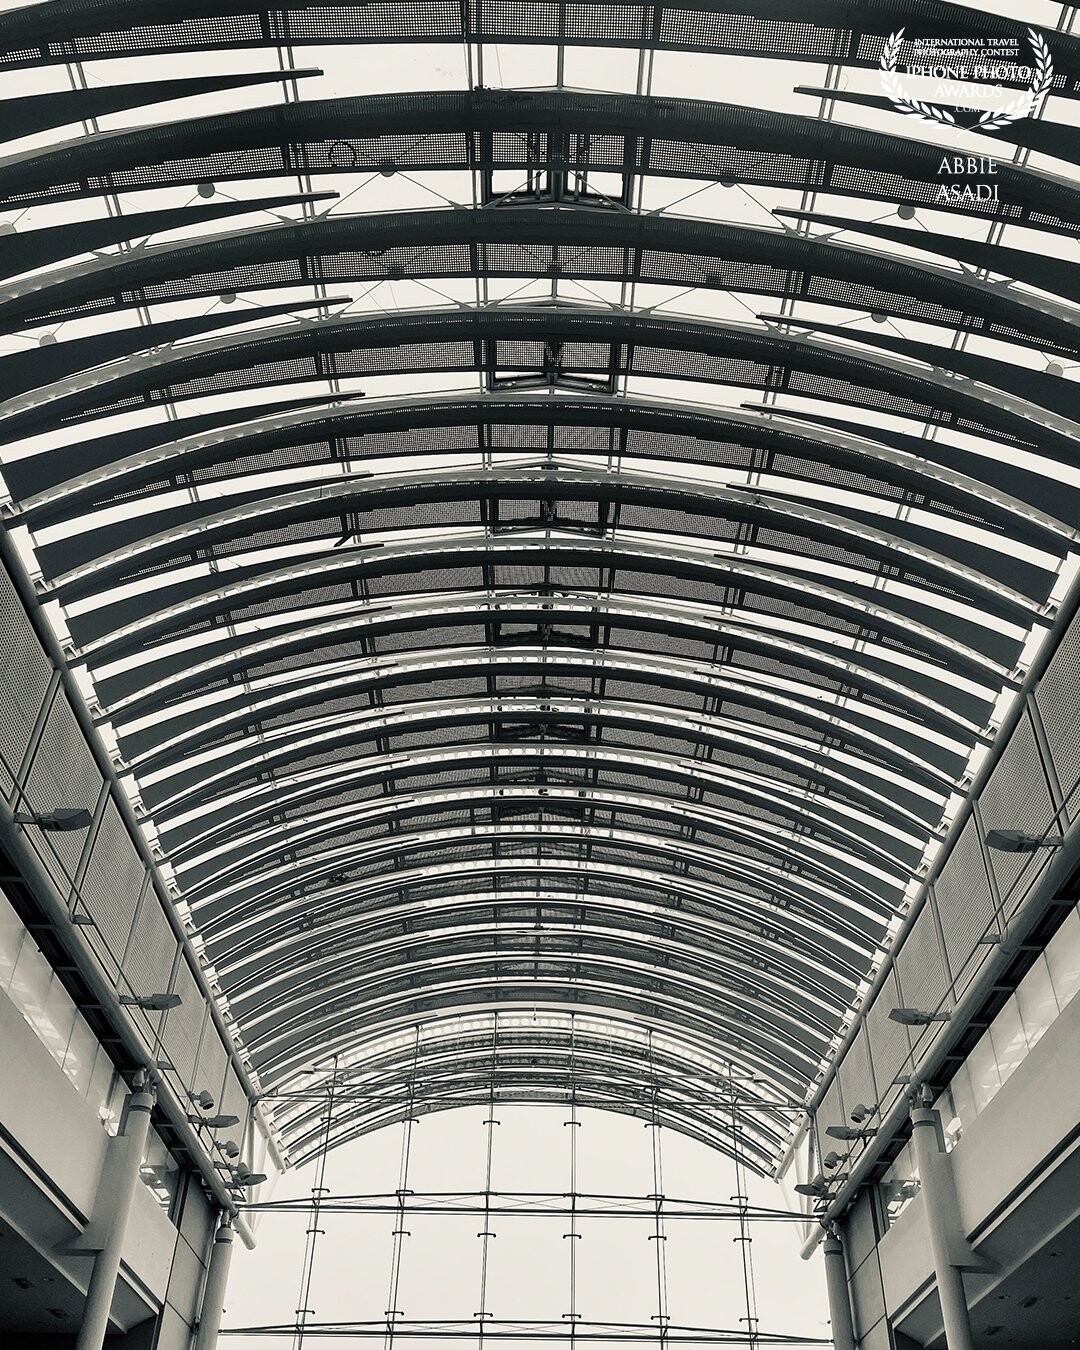 Architecture gets me every time and I don’t know about you, but I’m always looking up. Pleasing shapes and lines that dictated a black & white shot to enhance their detail for you all to enjoy.